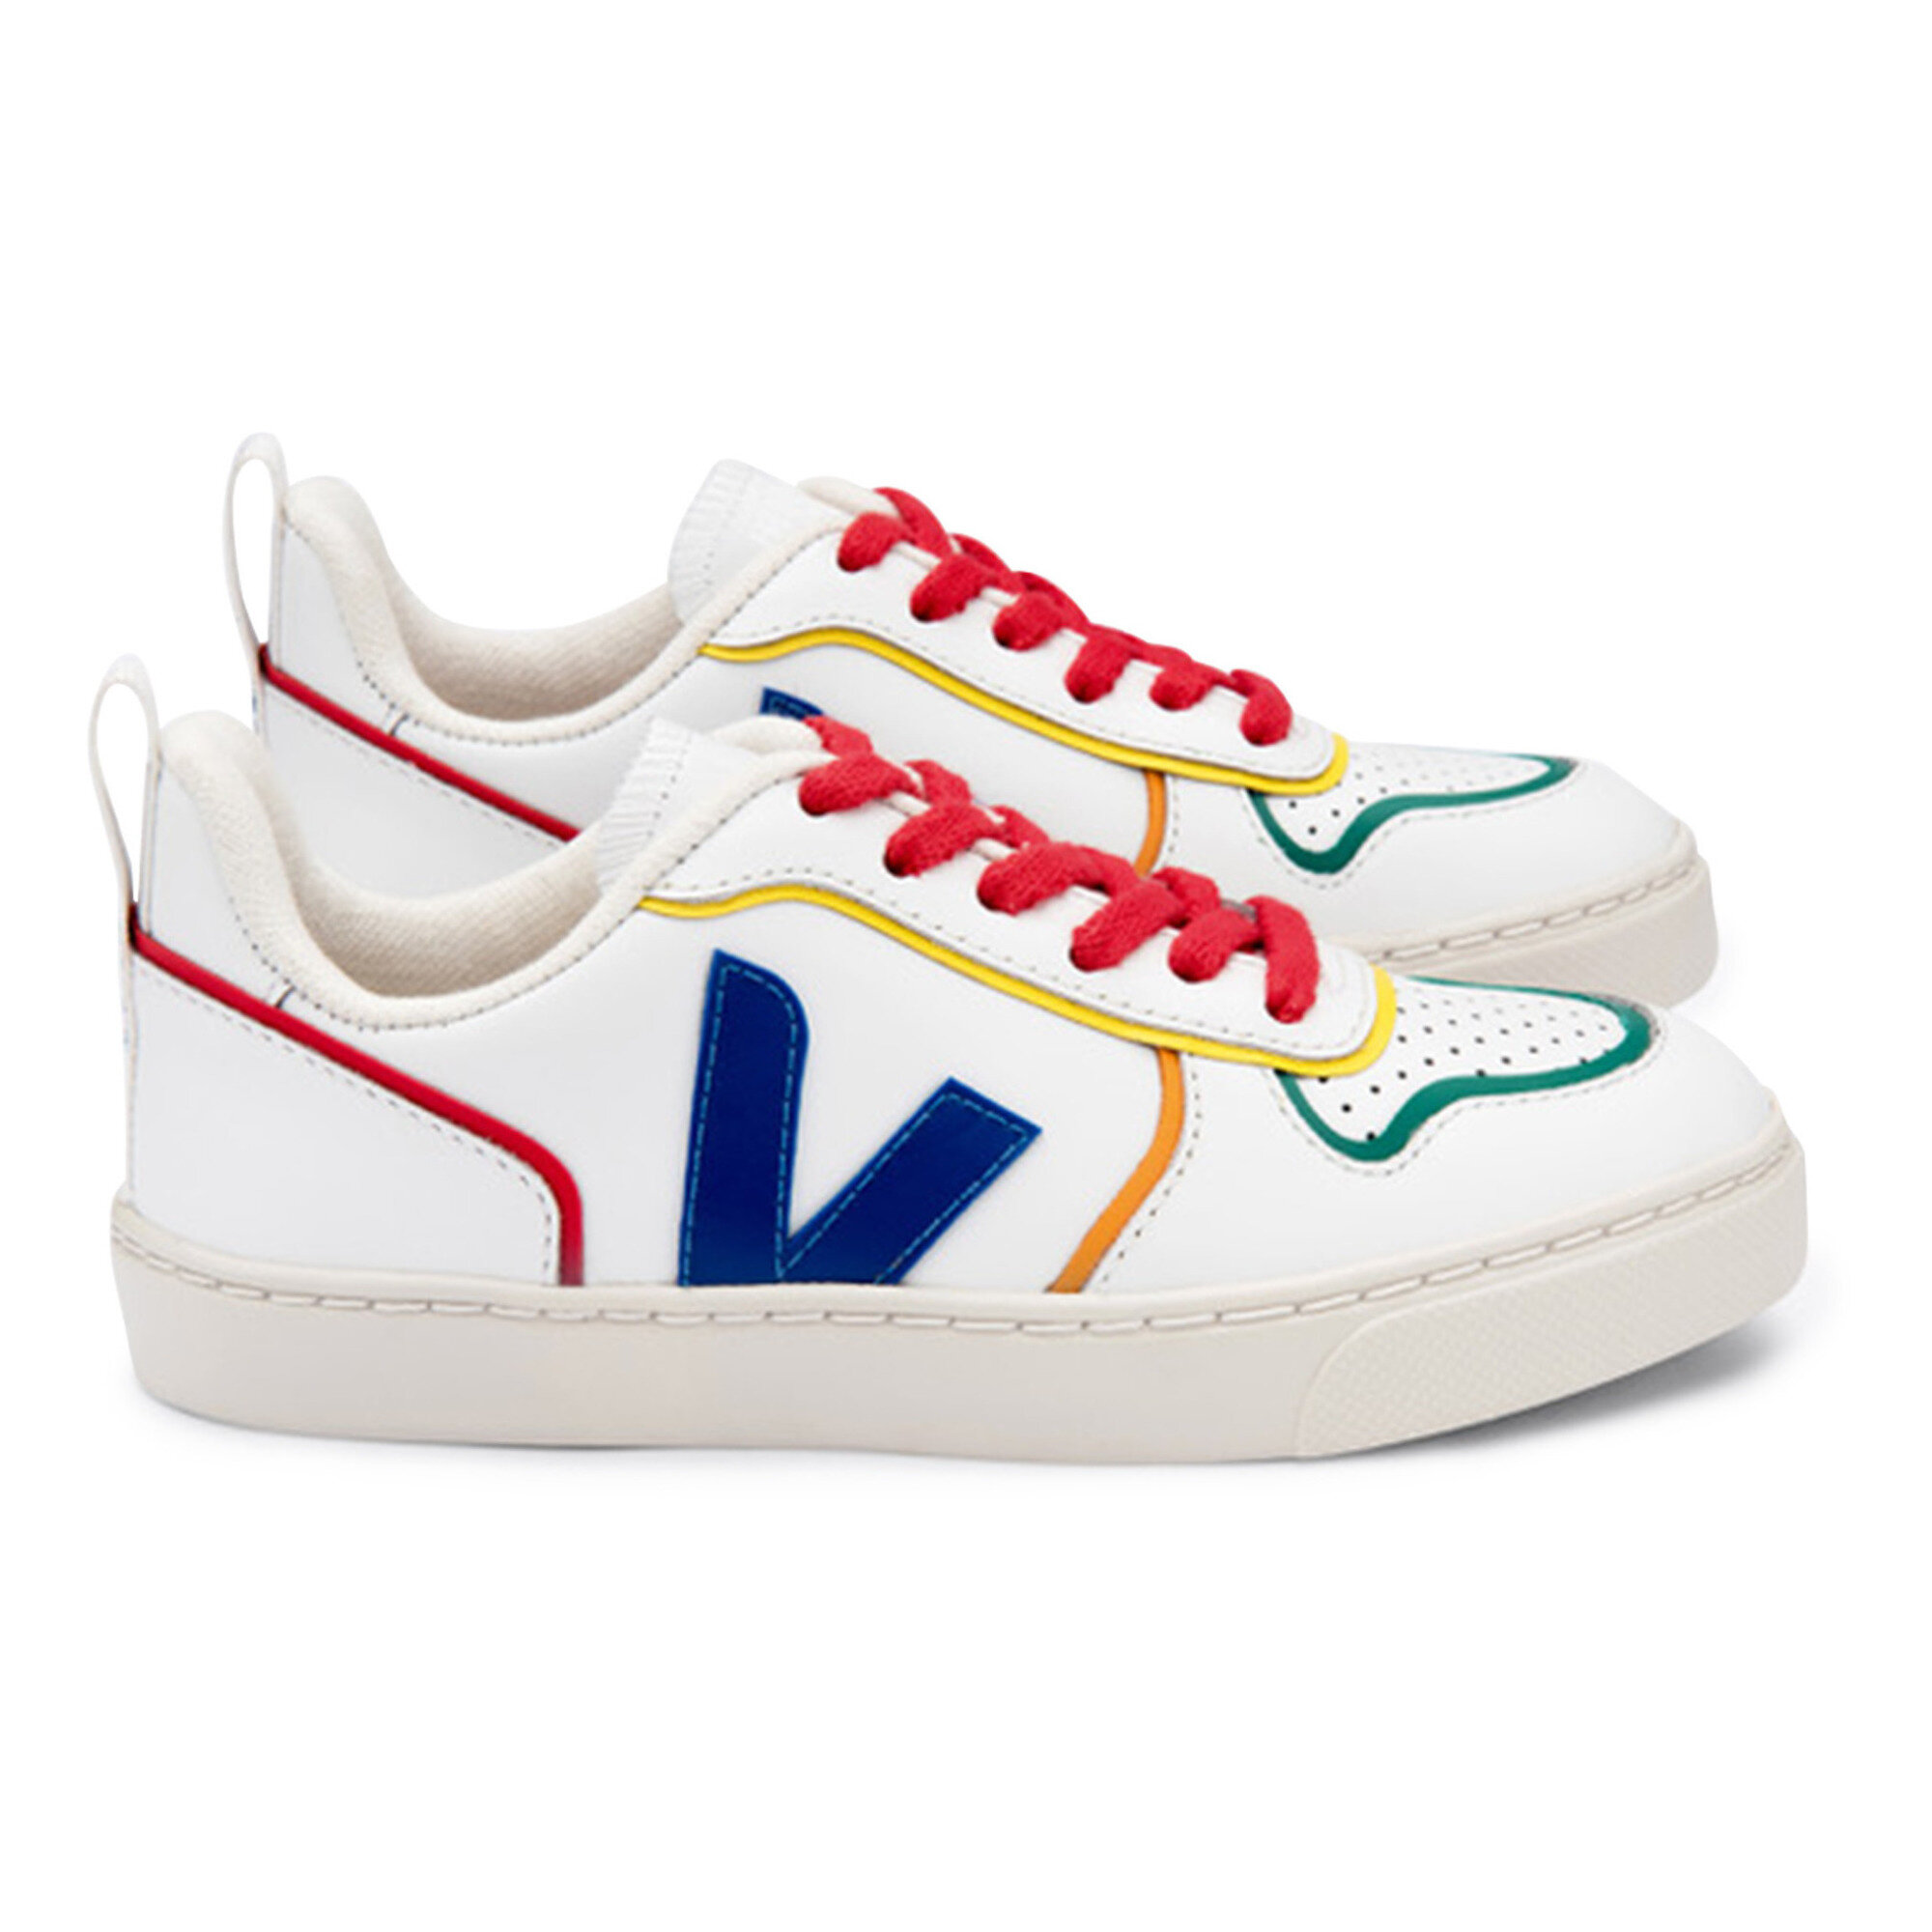 Shoe Brand Veja Collaborates With Hundred Pieces on Vegan Sneaker — meer